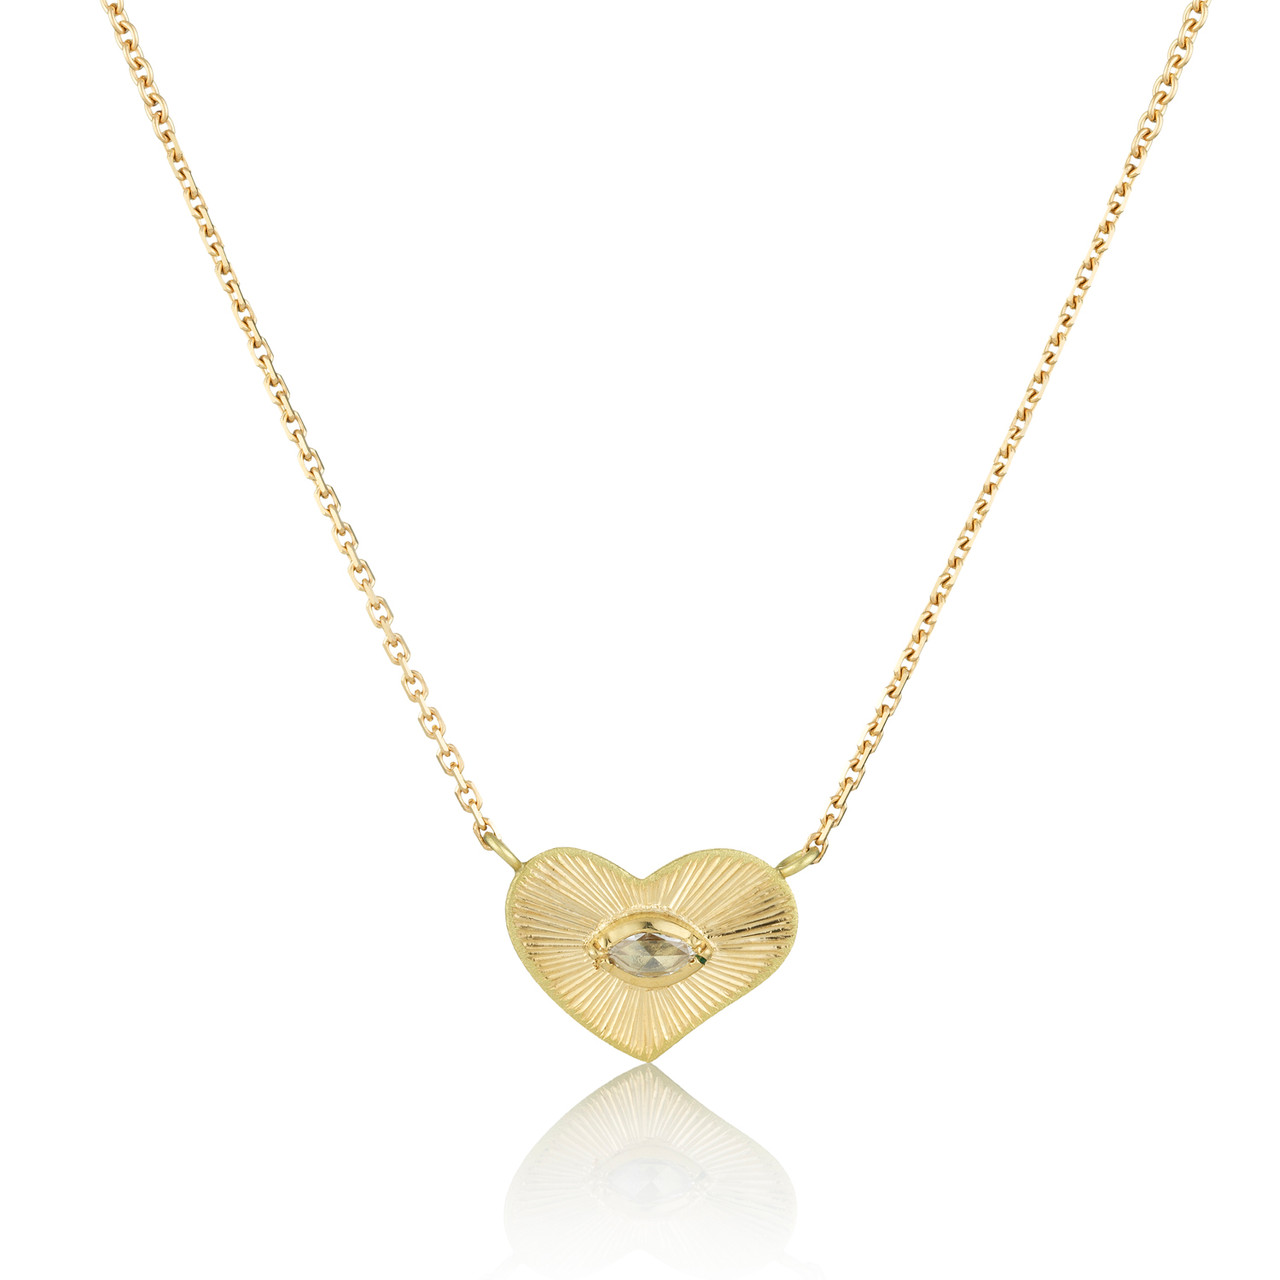 Engraved Diamond Heart Necklace, Brooke Gregson, tomfoolery